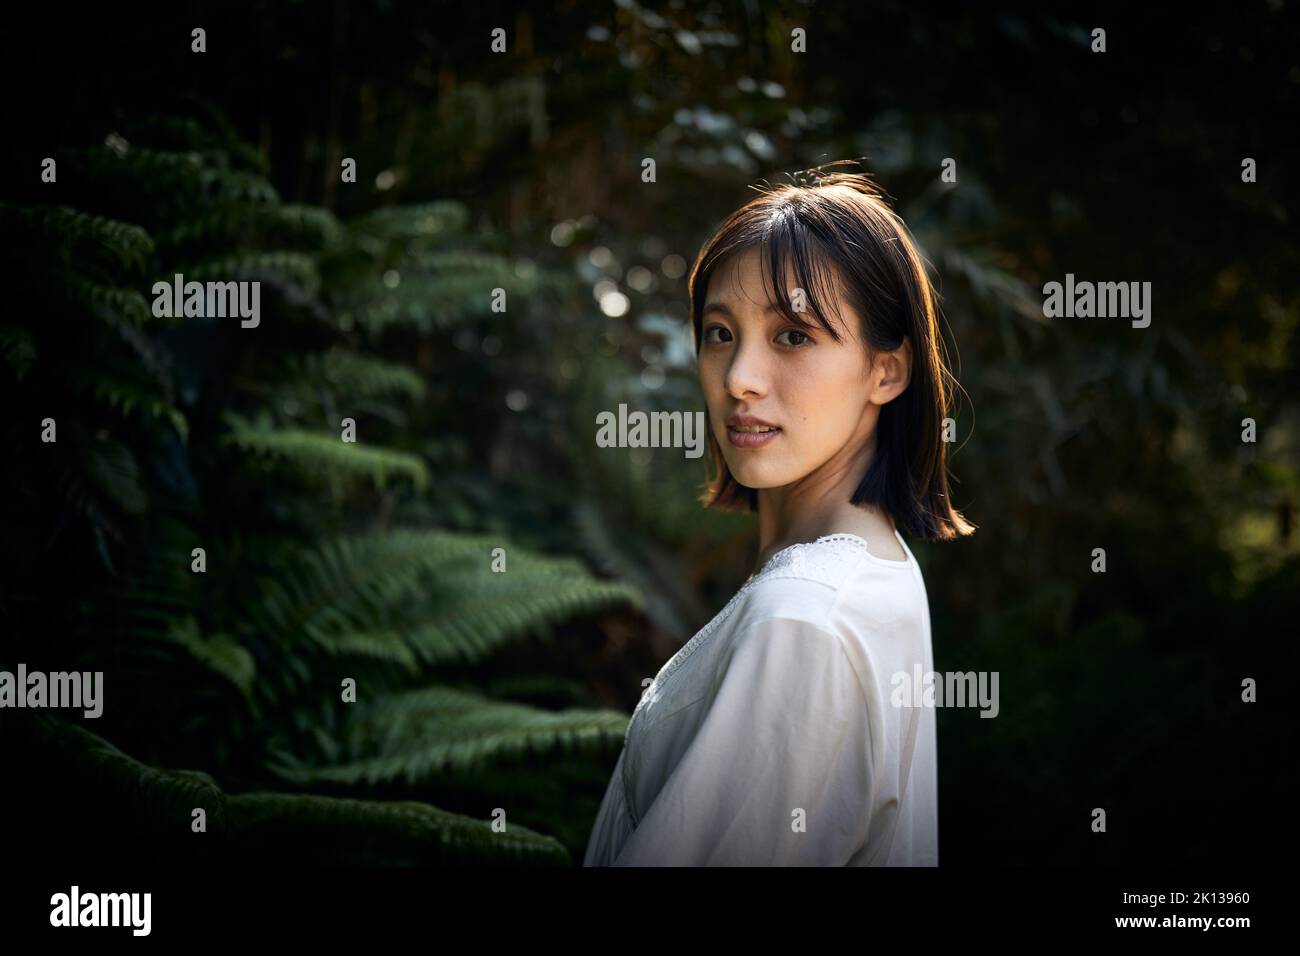 Japanese woman in a forest Stock Photo